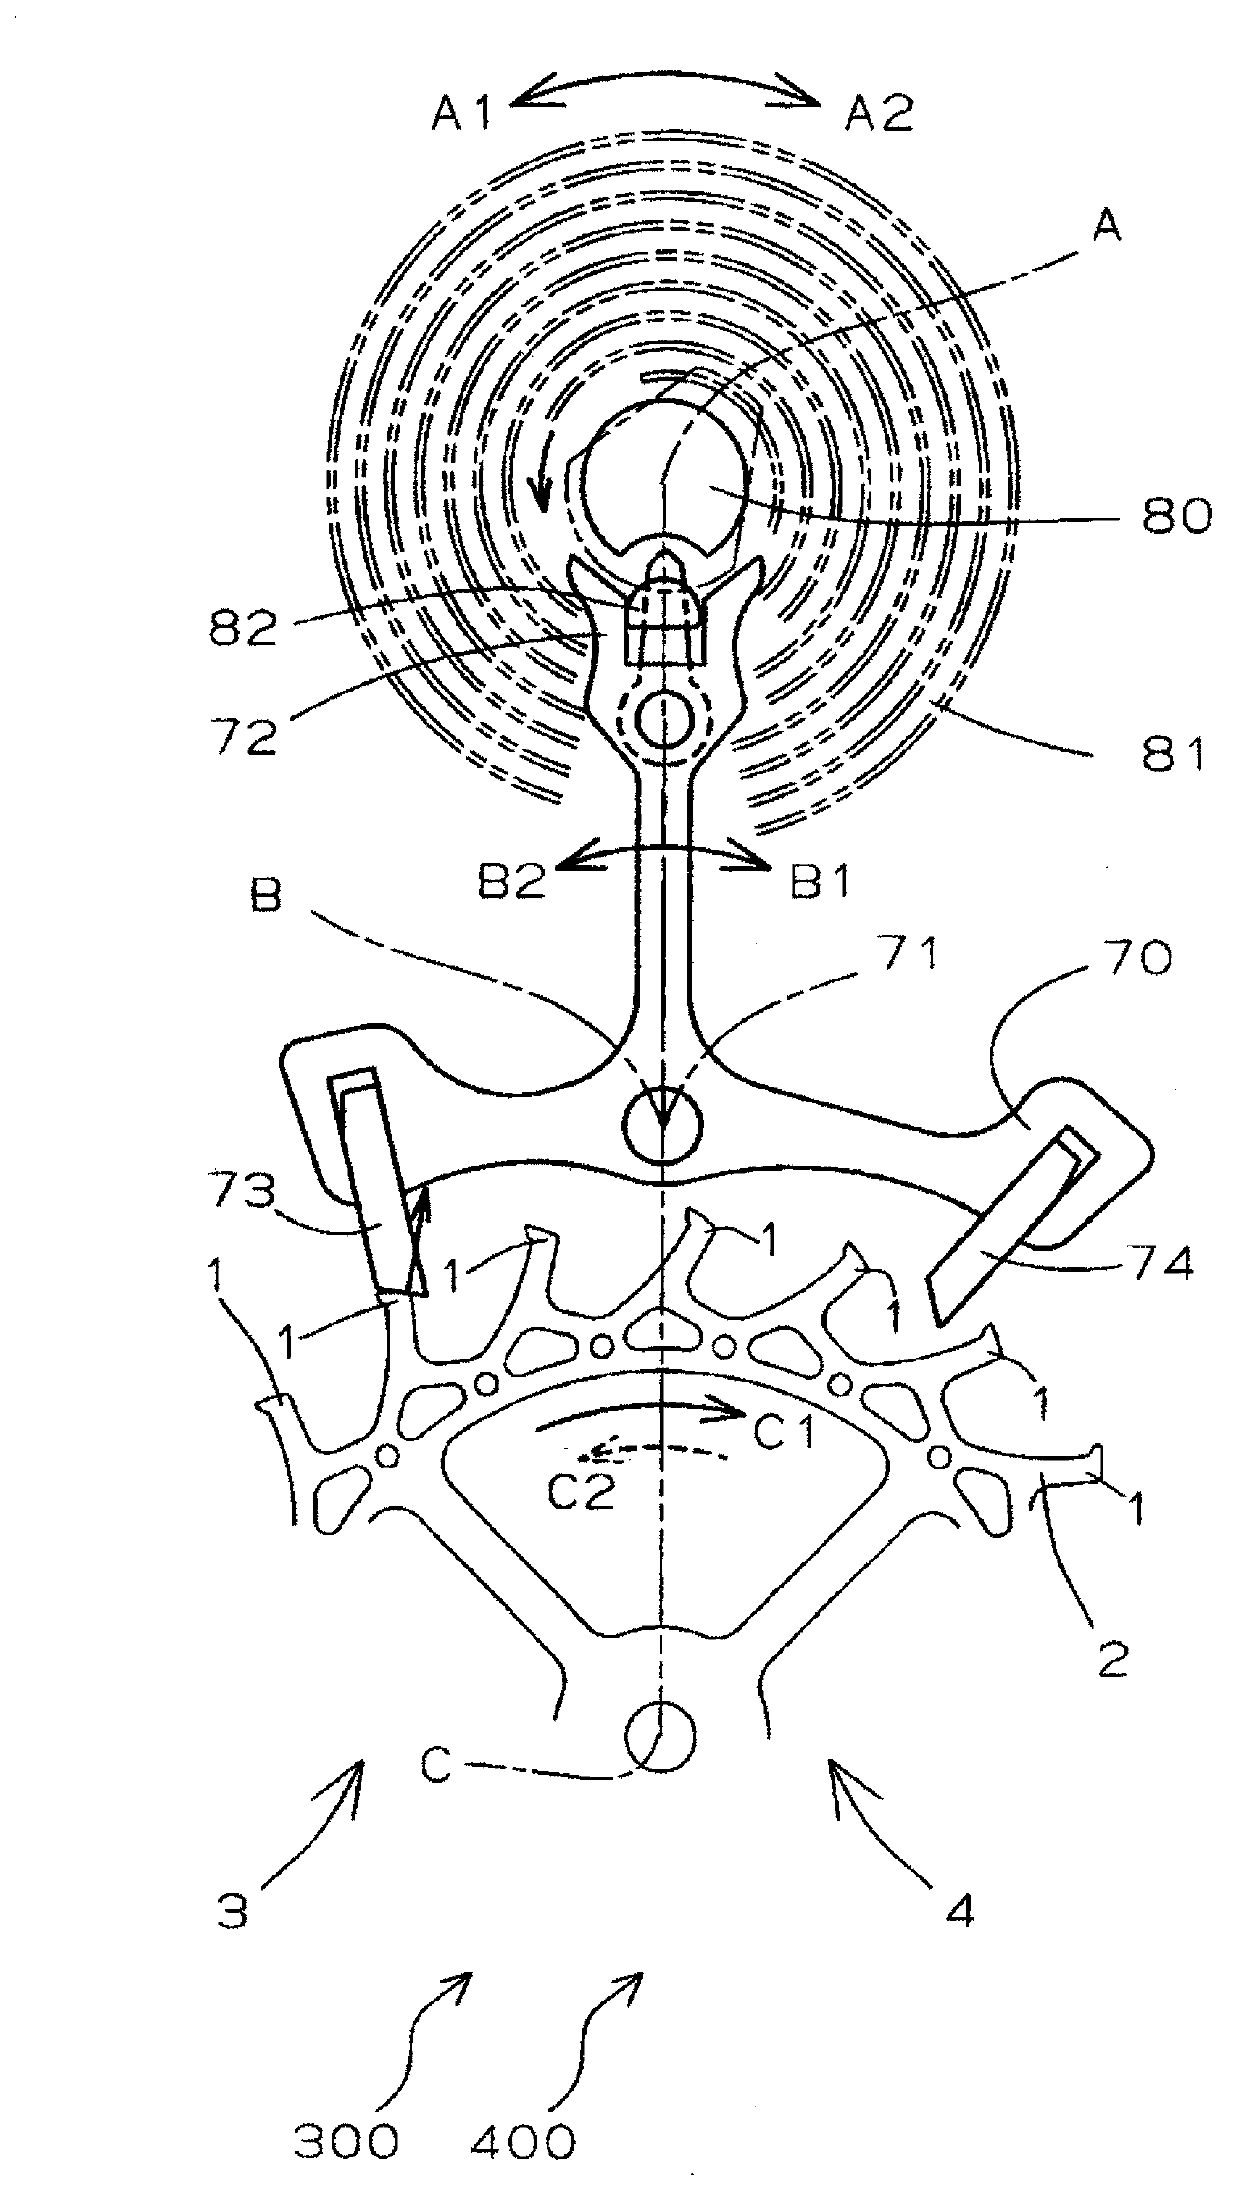 Escapement gear, escapement wheel employing the escapement gear, anchor-shaped escapement, movement, mechanical timepiece and method of torque transmission